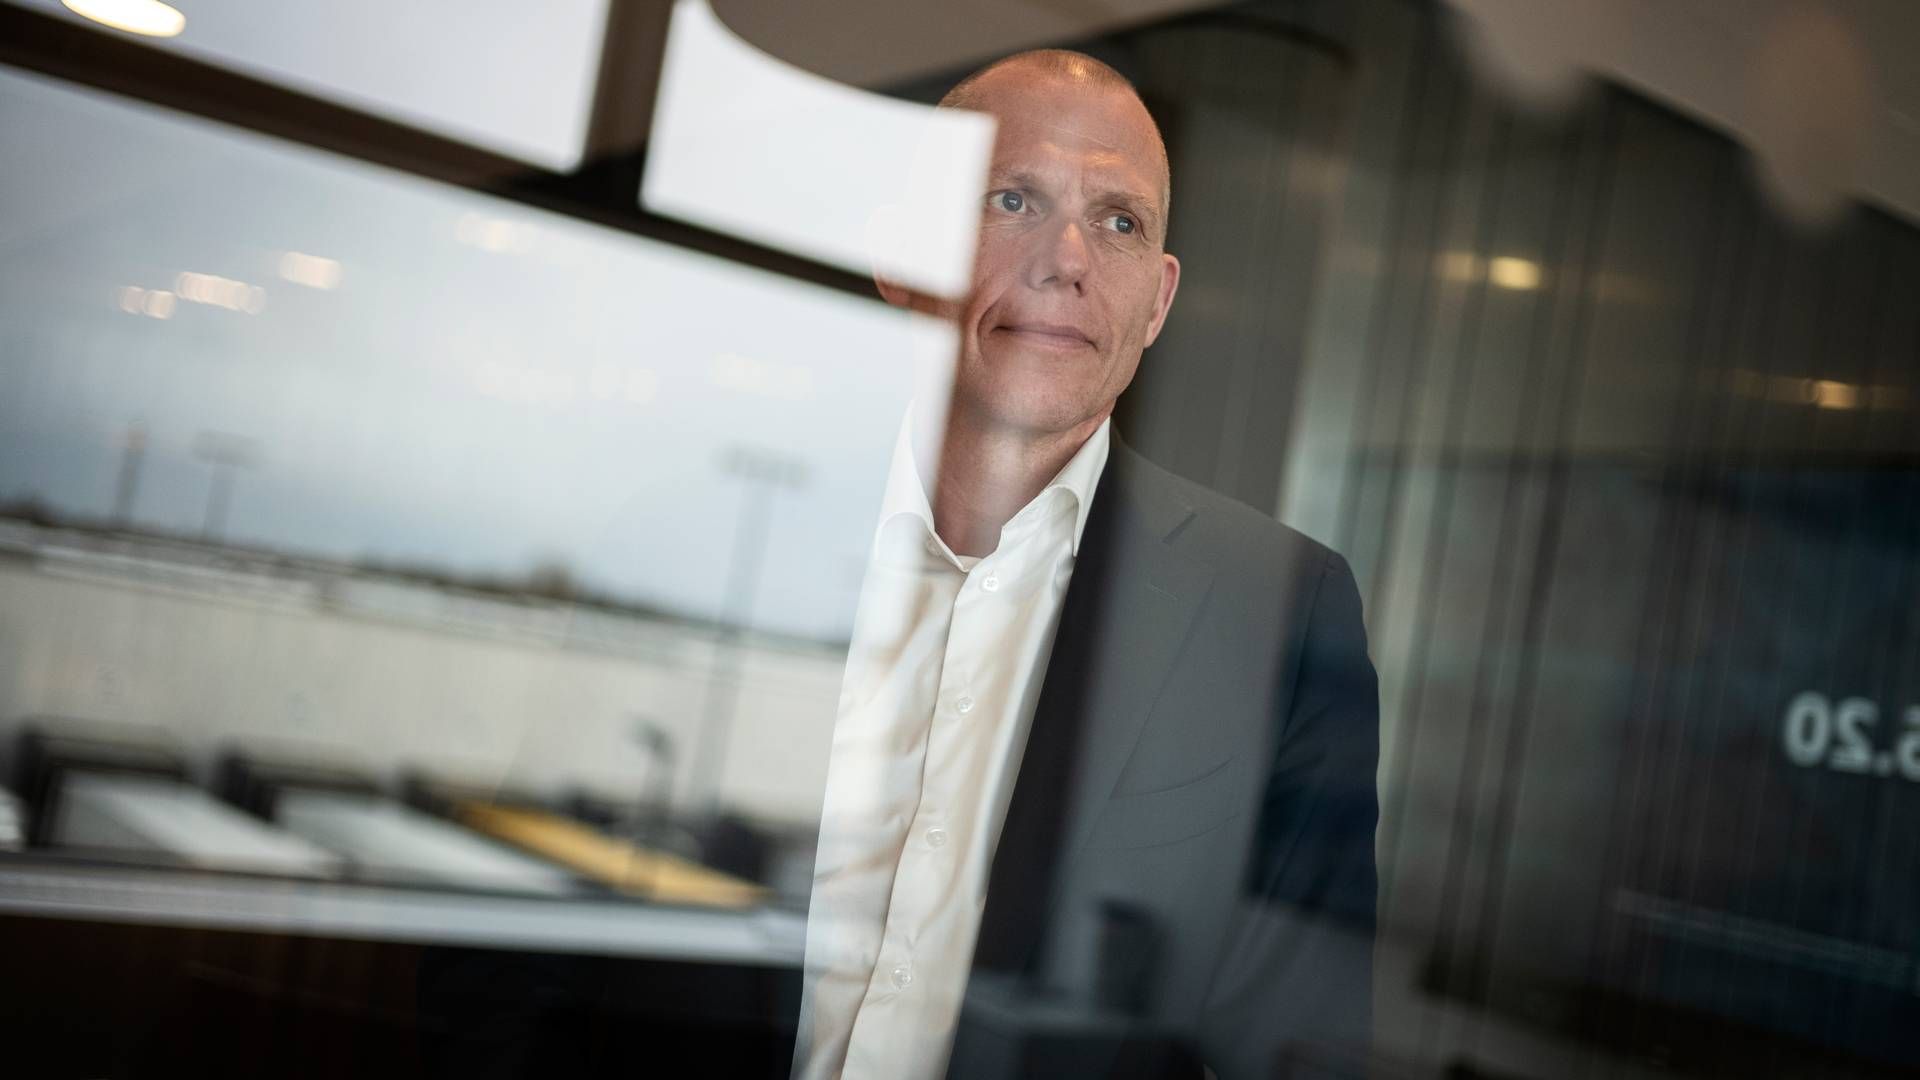 DSV and CEO Jens Bjørn Andersen may adjust their guidance next week, analysts predict. | Photo: Sofia Busk